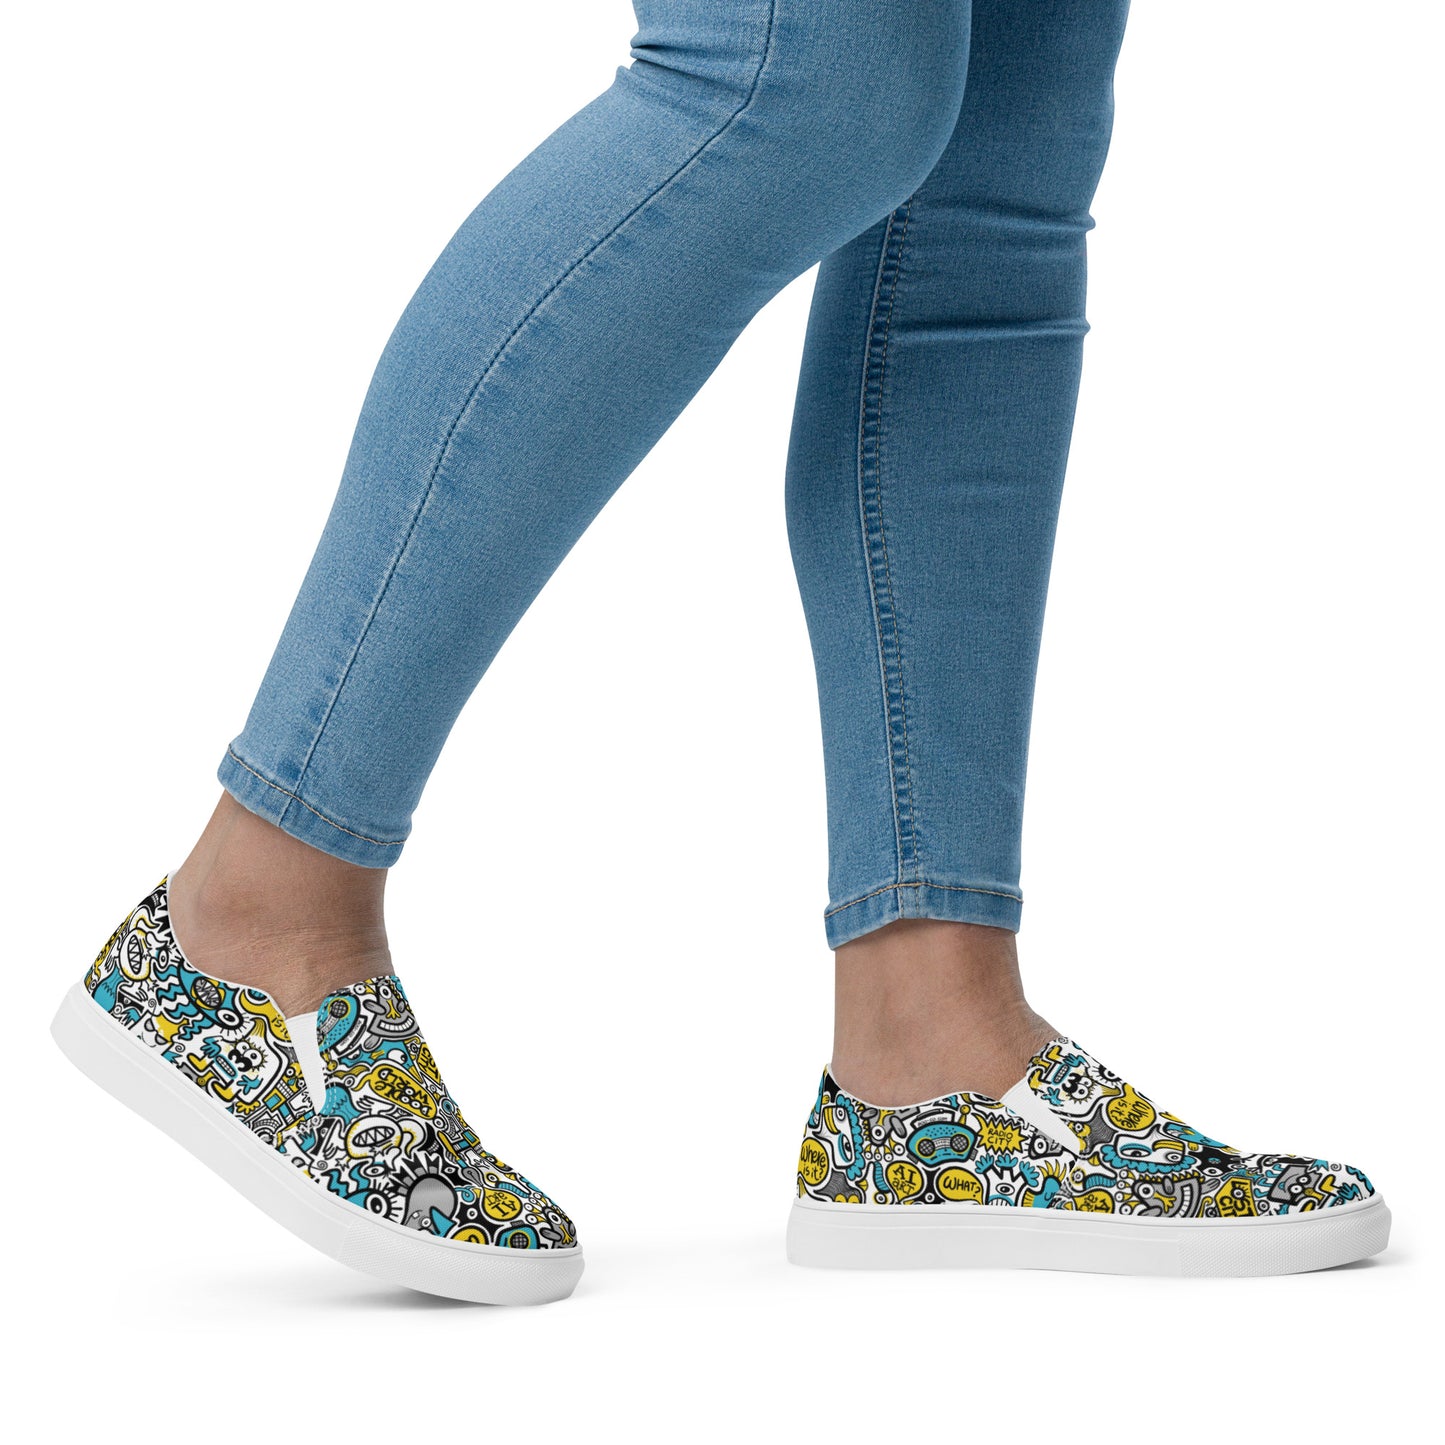 Discover a whole Doodle world buzzing in Lost city Women’s slip-on canvas shoes. Lifestyle